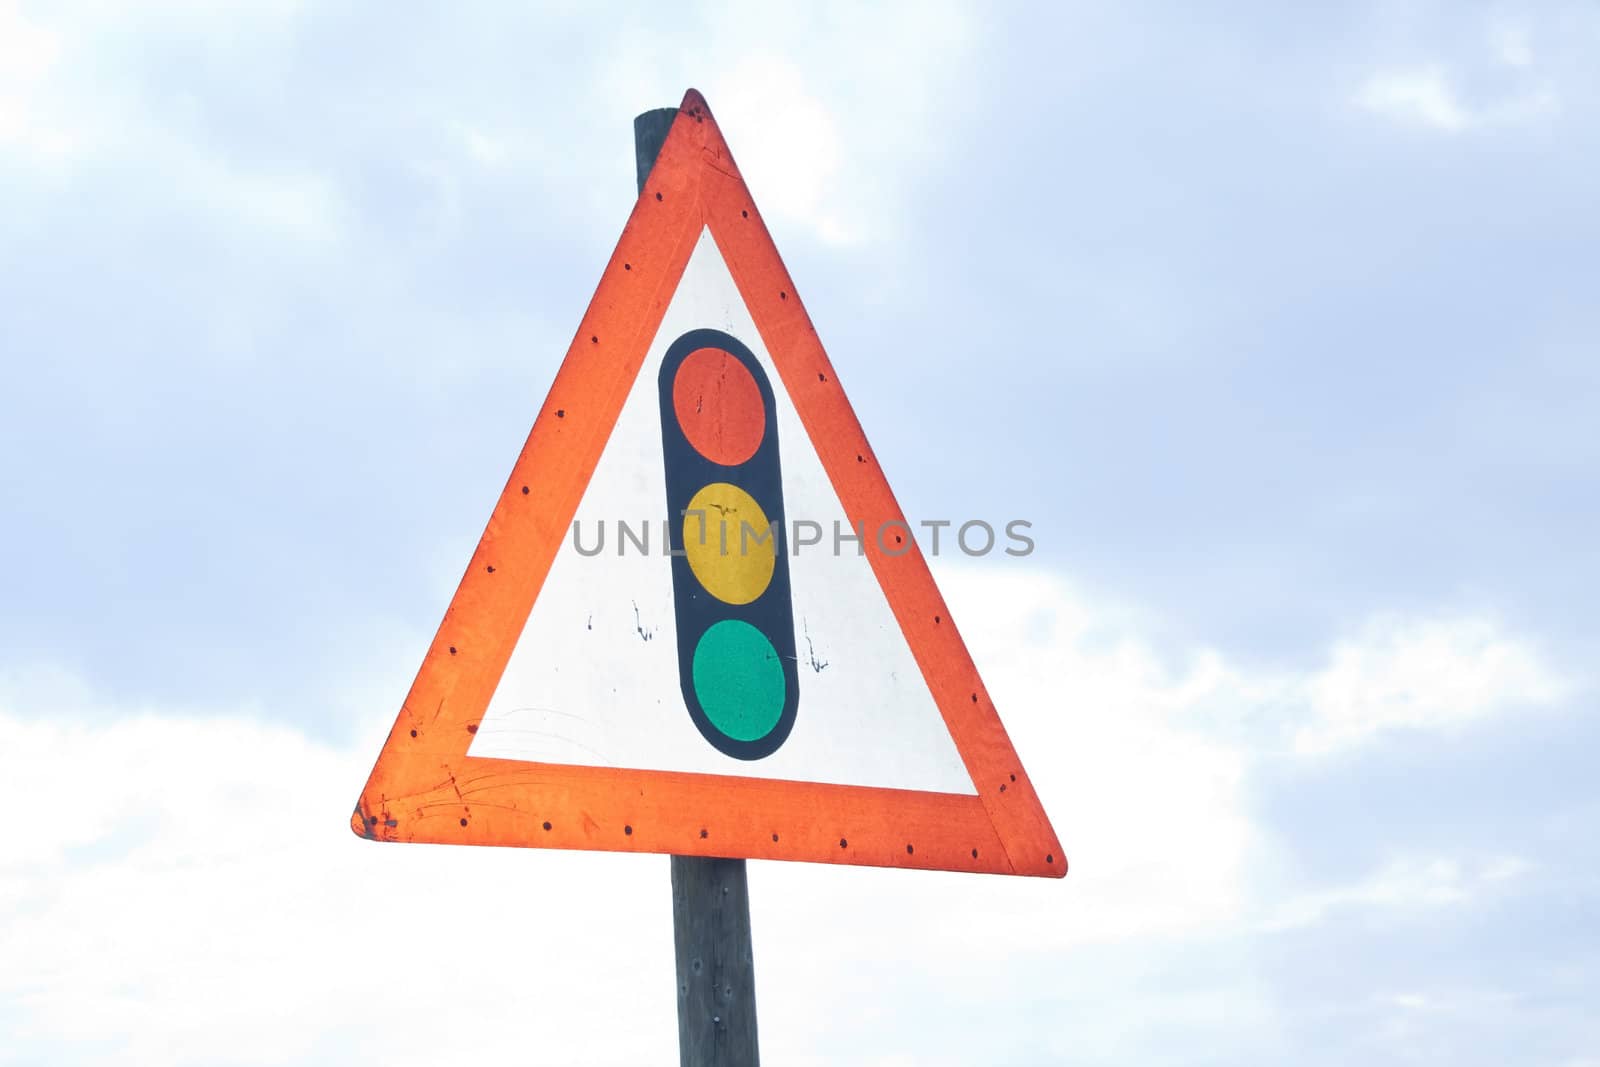 Caution sign with traffic lights